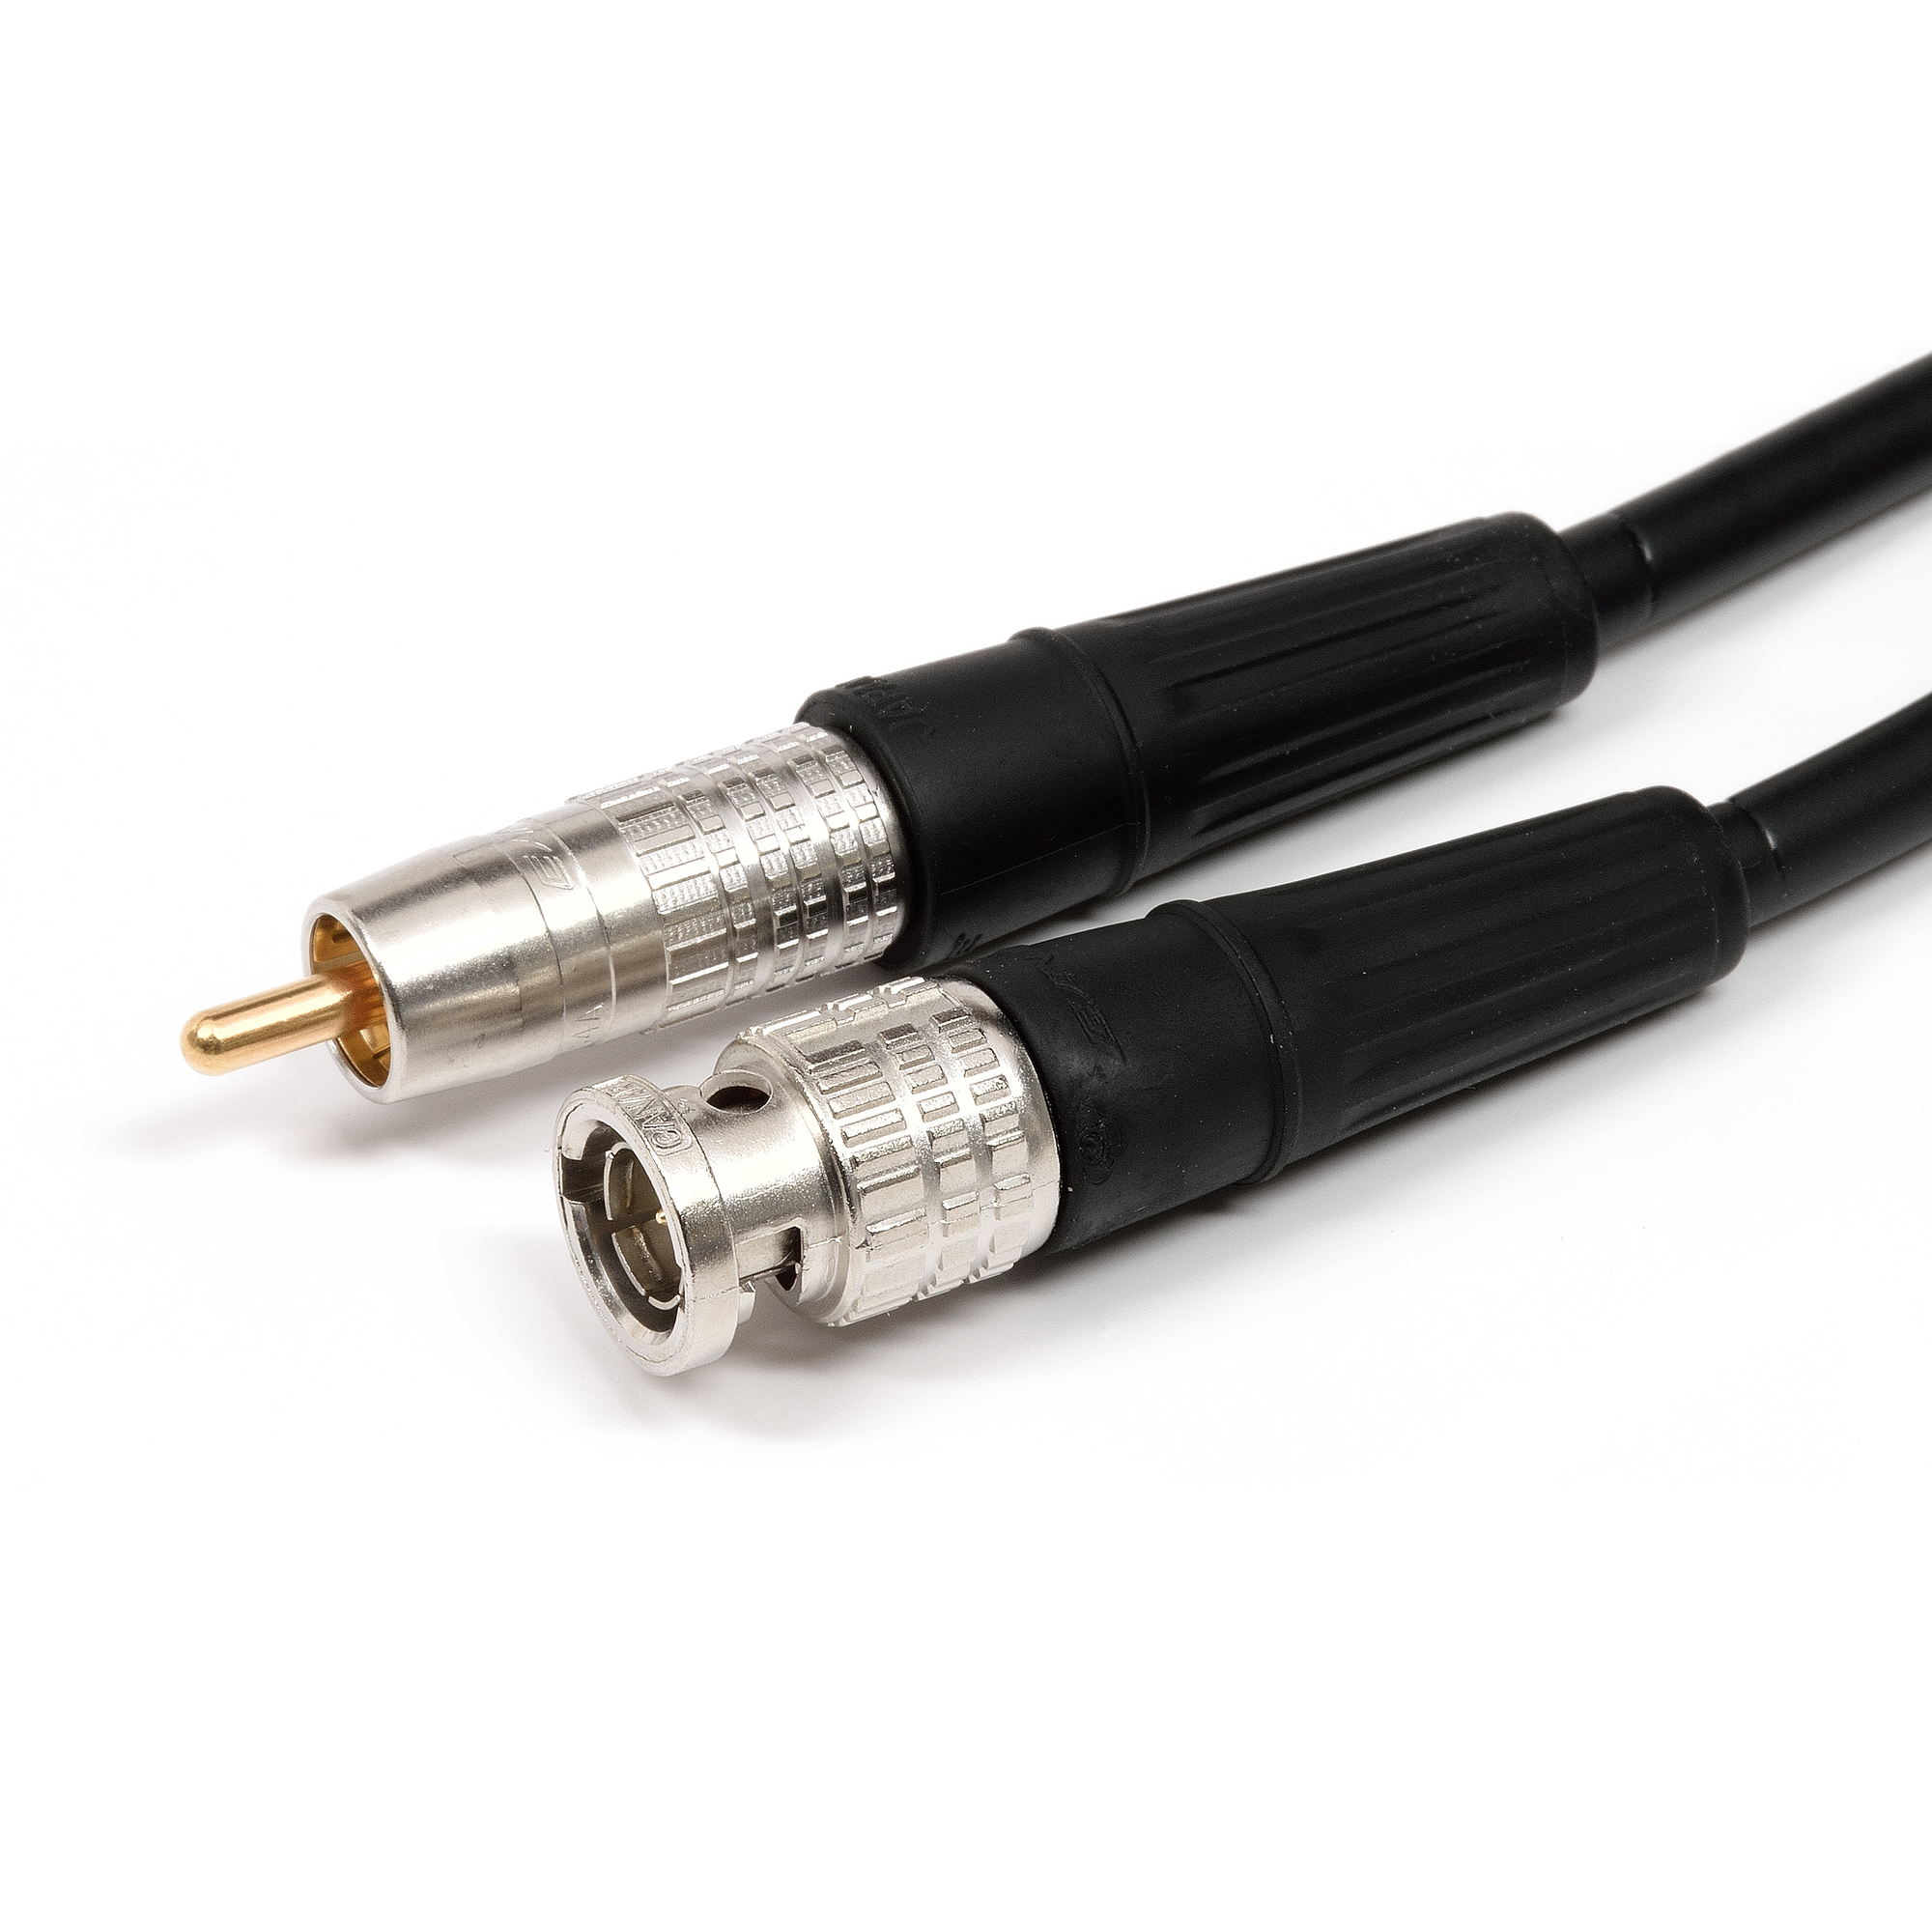 RCA Cables for Analog Devices